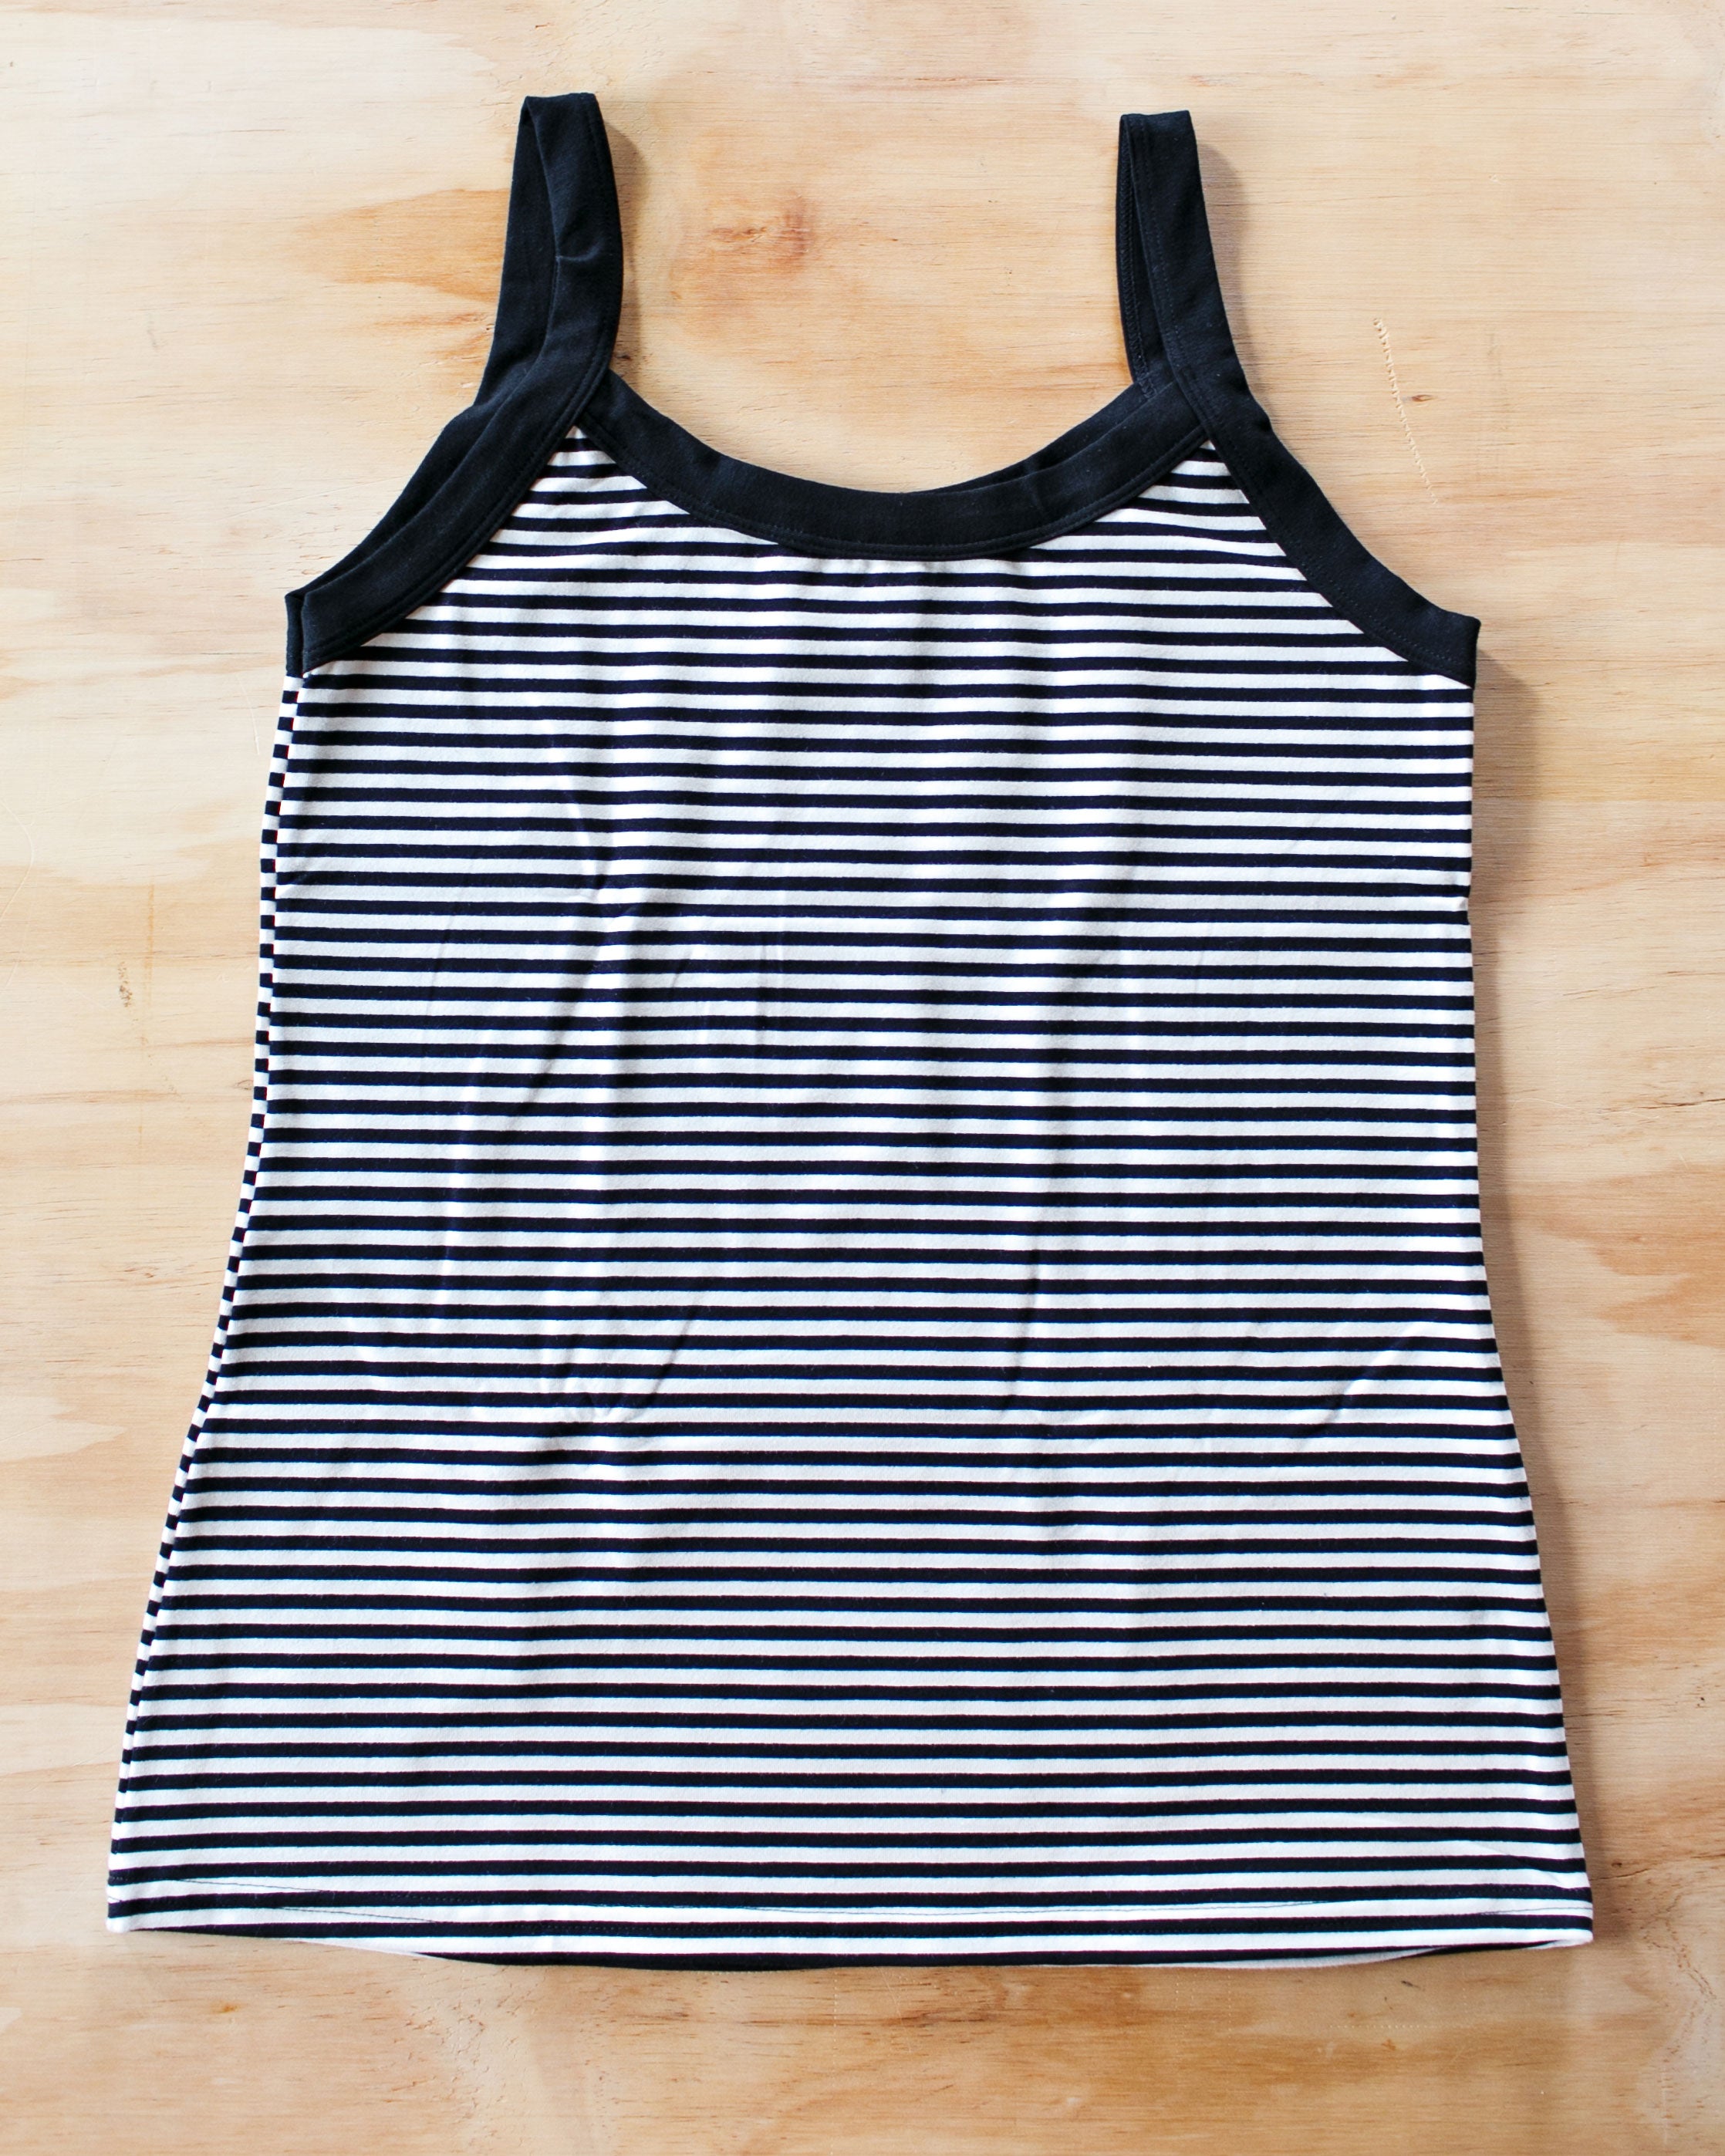 Flat lay of Thunderpants organic cotton Camisole in Black and White Stripes.